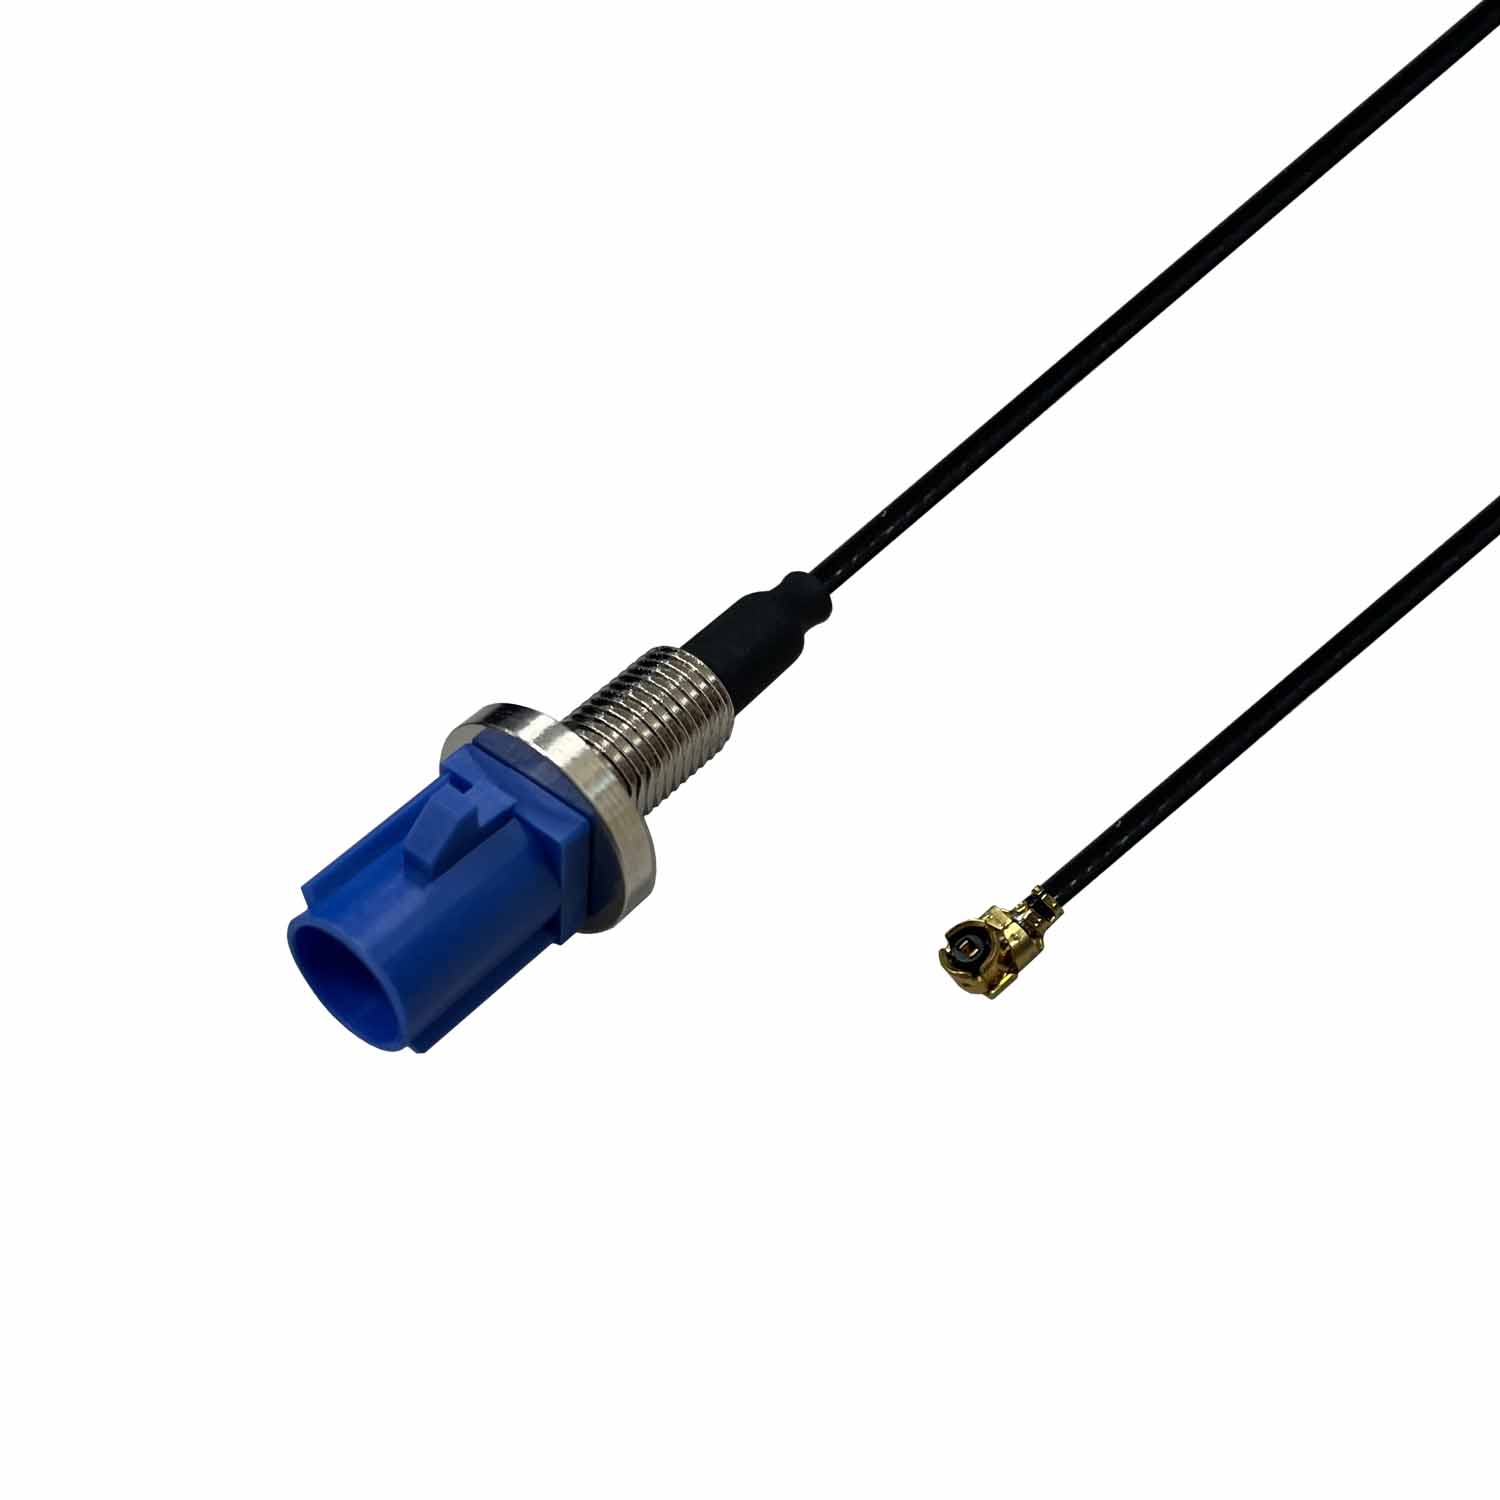 FAKRA CABLE｜汽车类产品